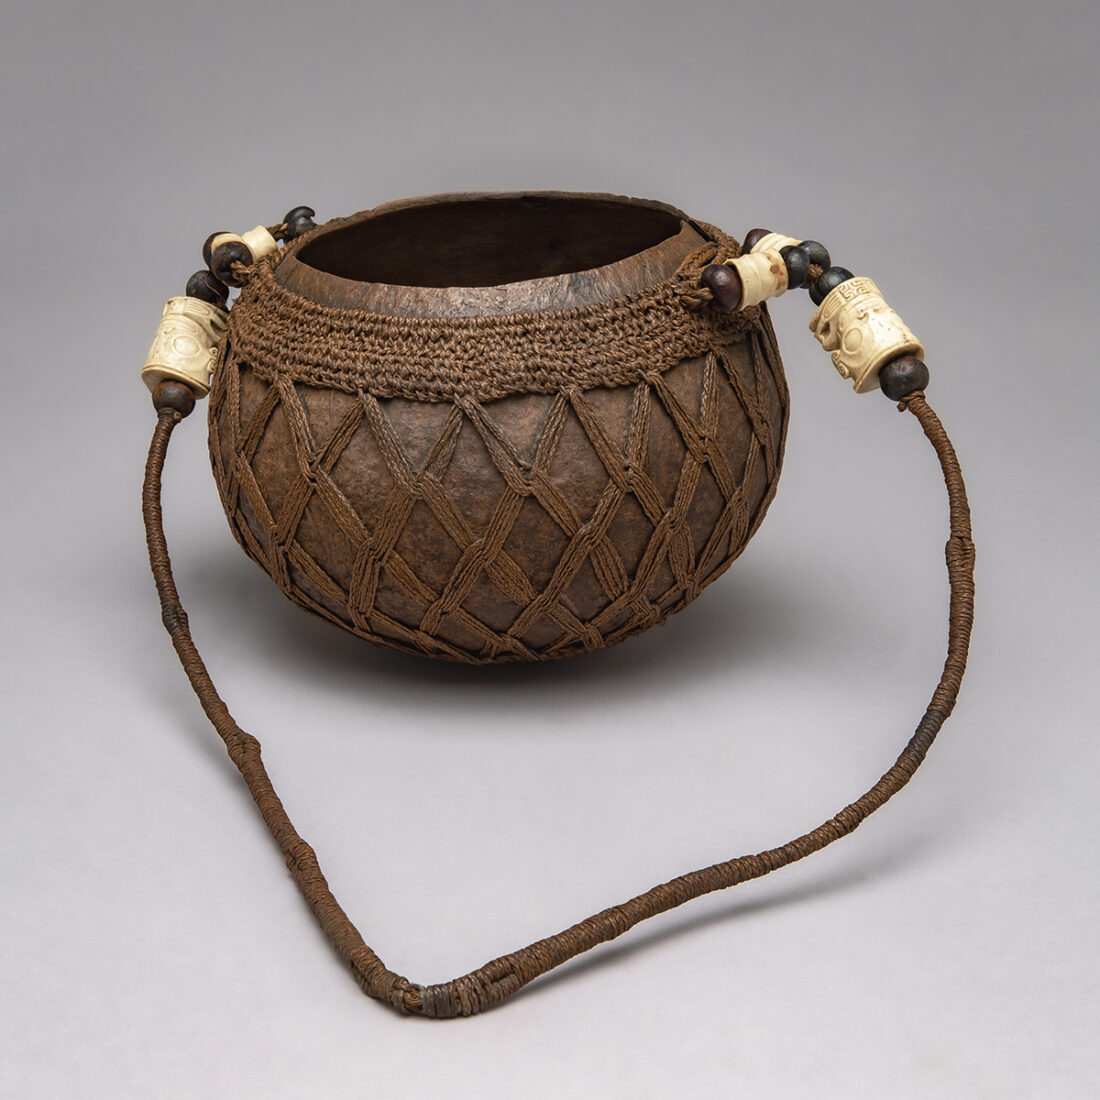 Water vessel with decorative carvings, Marquesas Islands, before 1960, Pacific Ocean